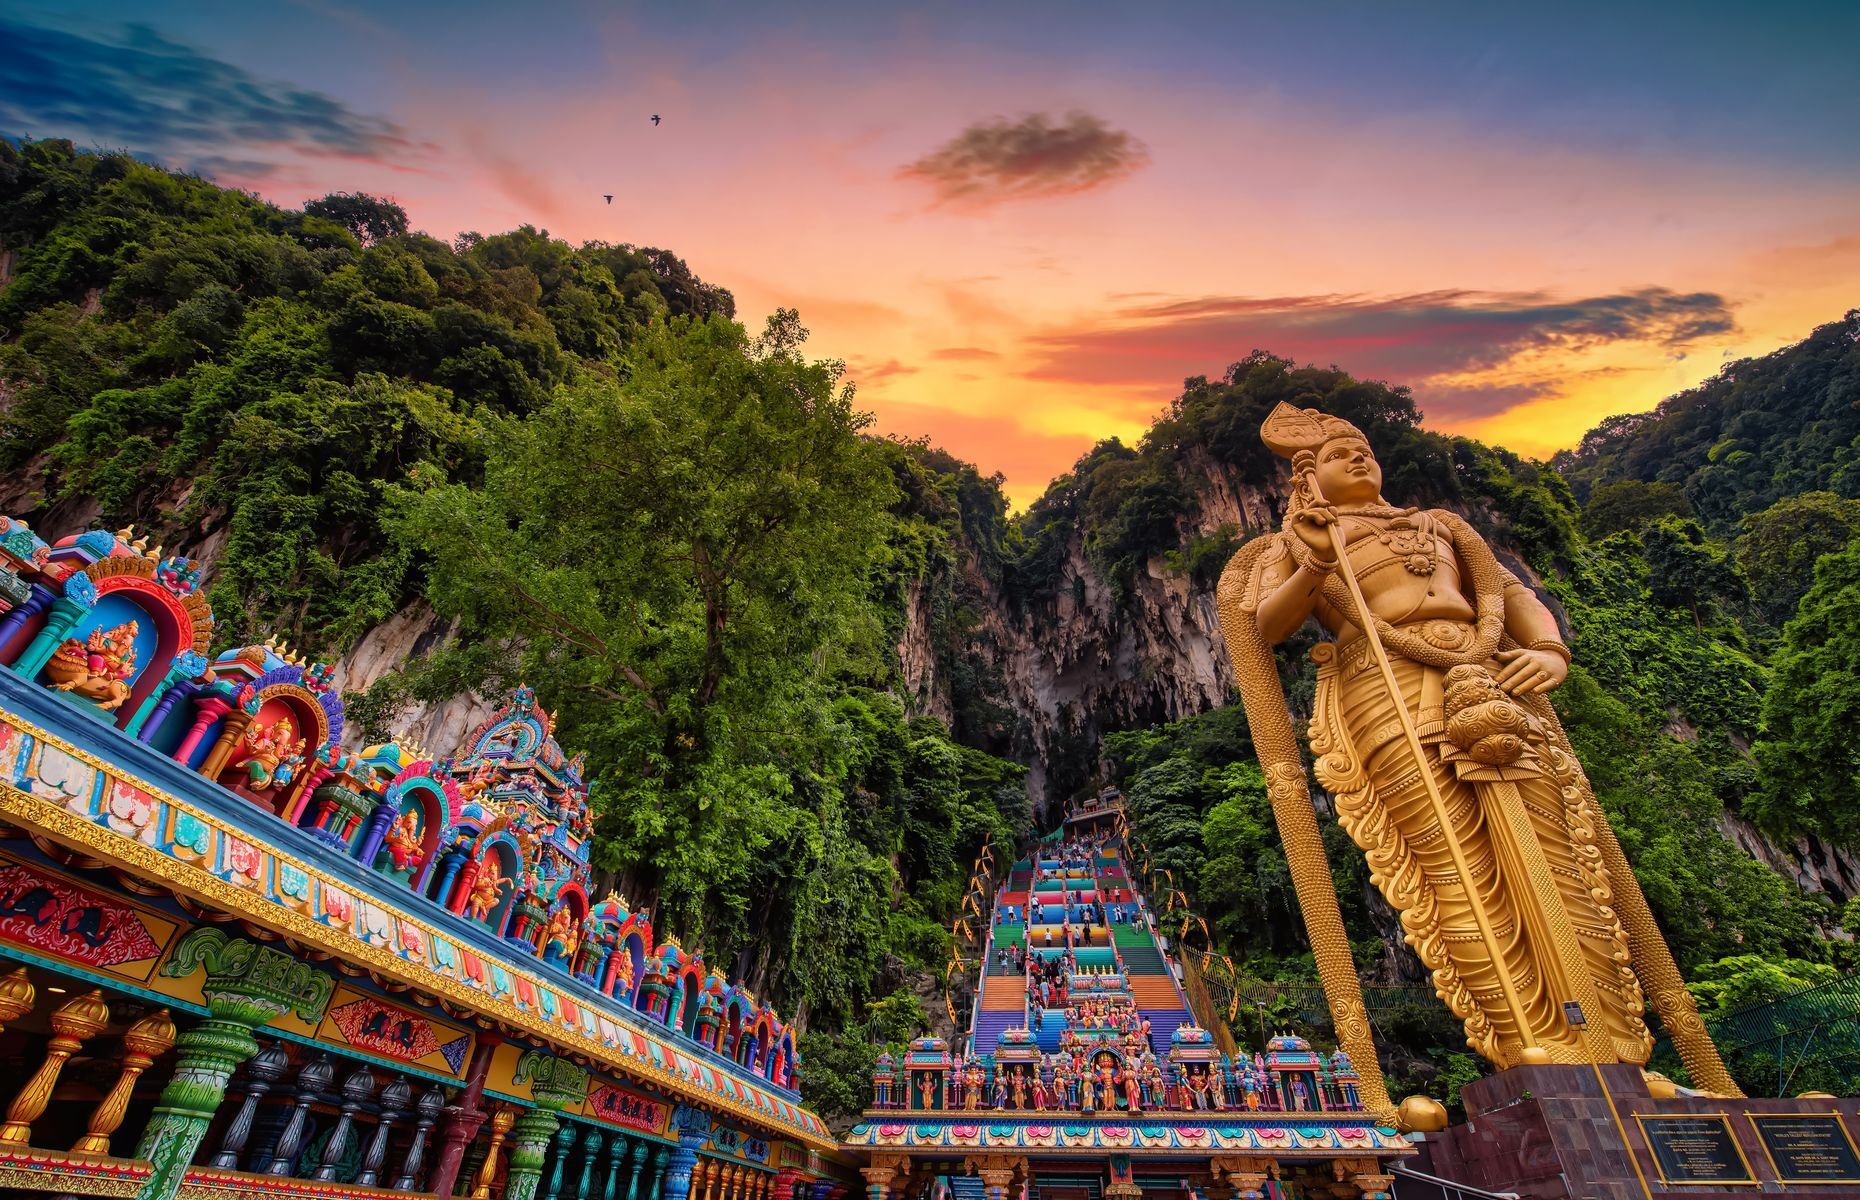 <p>You’ll find <a href="https://www.getyourguide.com/grottes-de-batu-l4011/" class="atom_link atom_valid" rel="noreferrer noopener">the Batu Caves</a> about 15 minutes by car from Kuala Lumpur. These geological and cultural wonders captivate visitors from all over the world. After climbing 272 steps, visit a series of fascinating caverns adorned with gigantic statues of Hindu deities. Considered sanctuaries, the Batu Caves are open to visitors year-round, but the best moment to see them is in January or February during the Thaipusam celebrations when festive decorations bring the caves to life.</p>